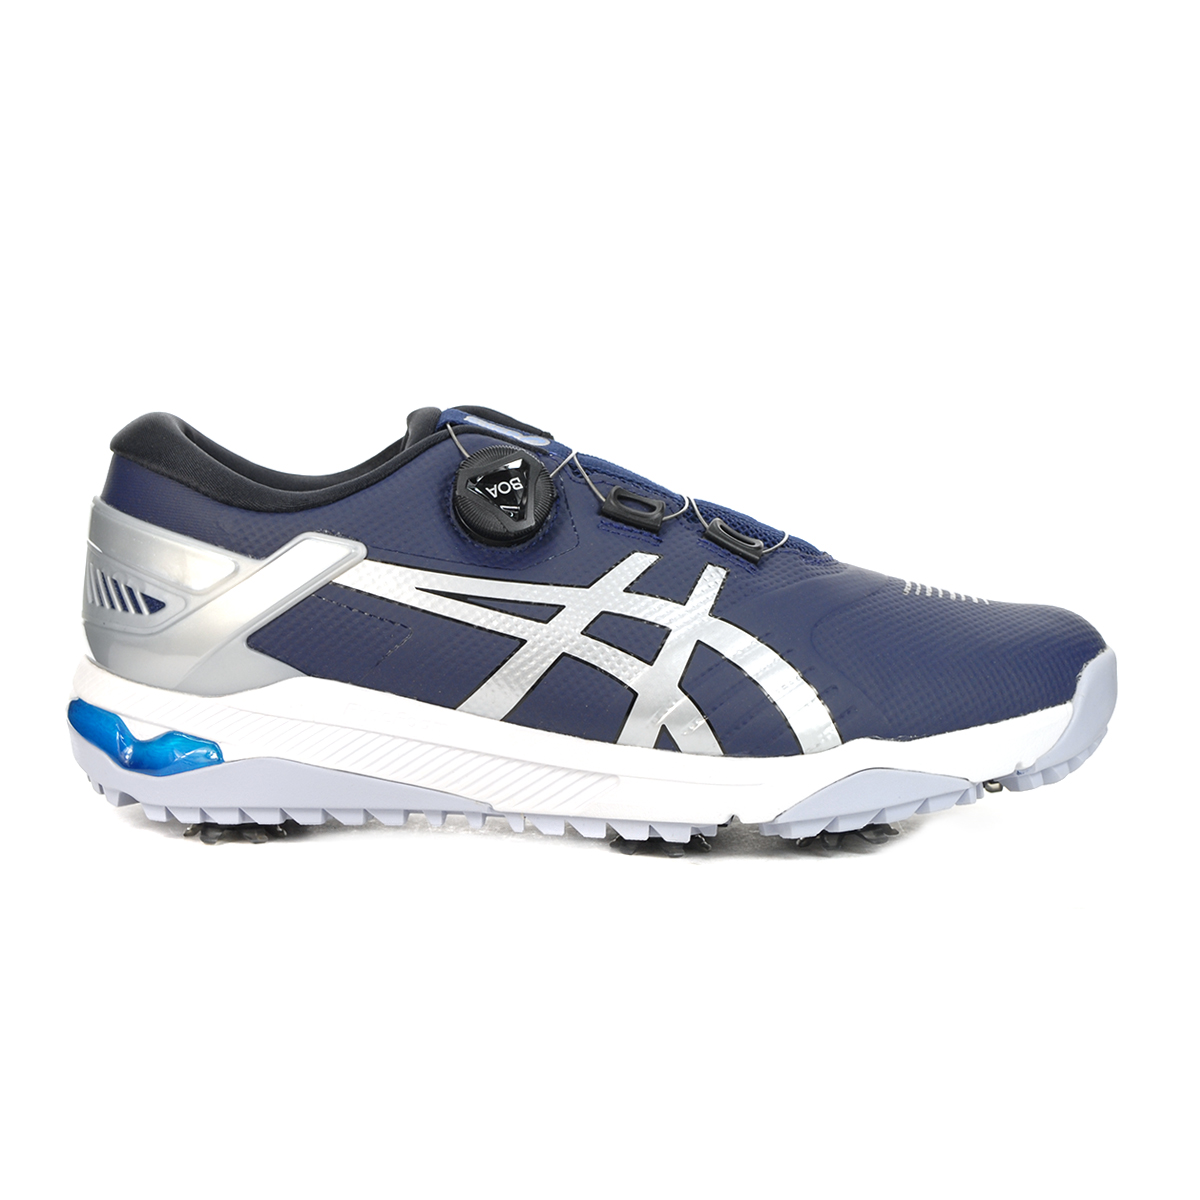 ASICS Men's Gel-Course Duo BOA Peacoat/Pure Silver Golf Shoes   